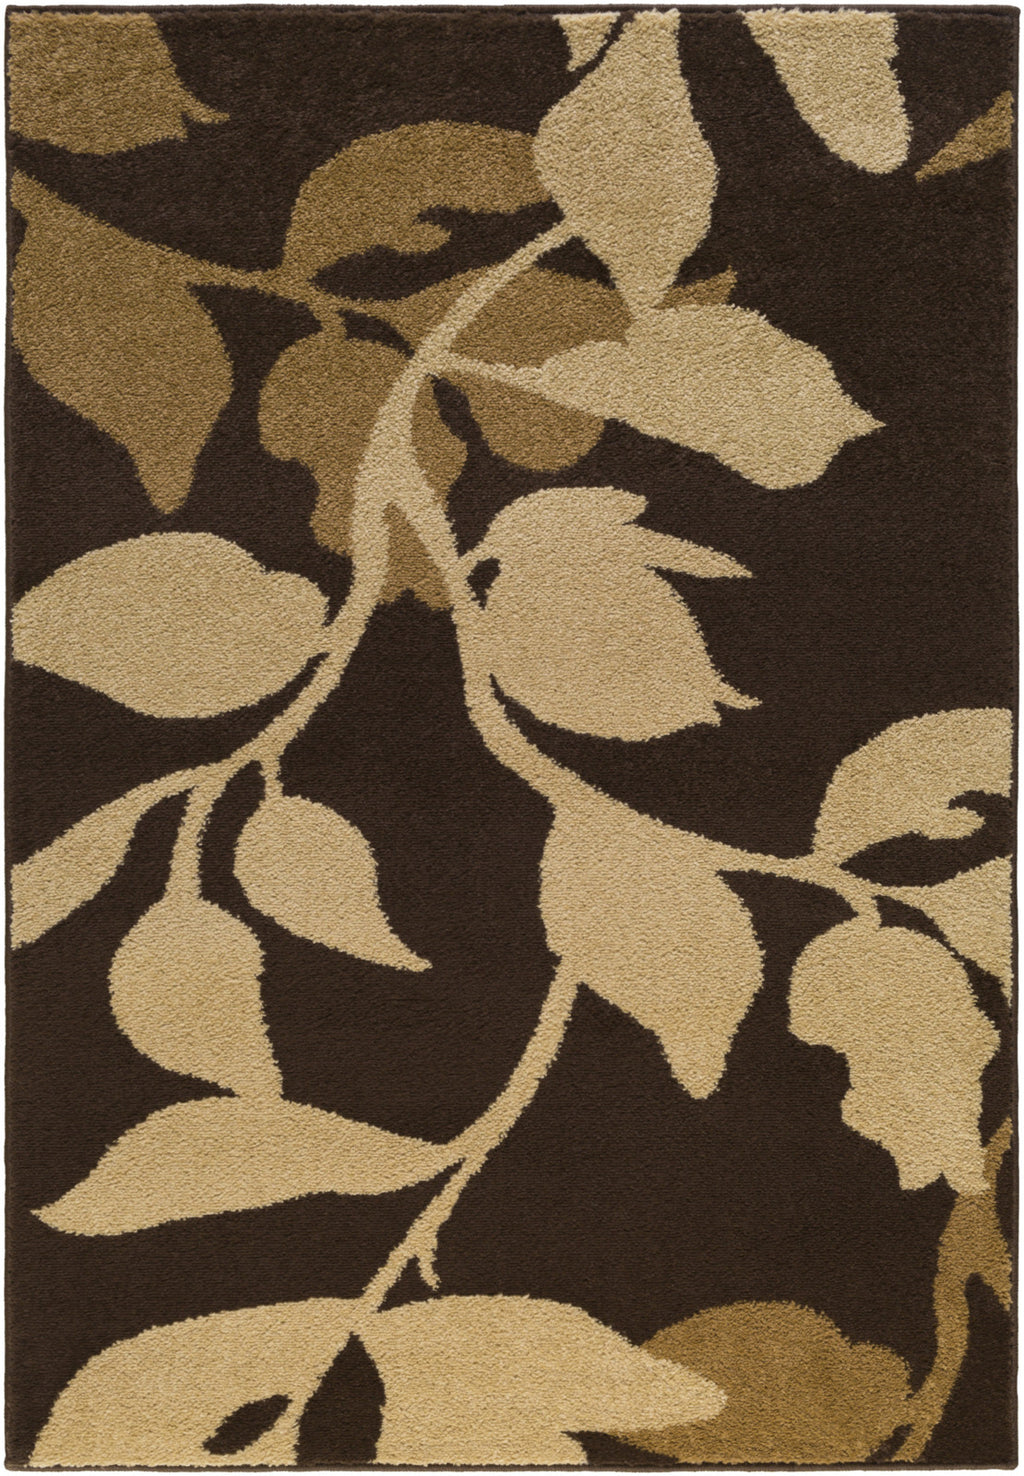 Surya River Home RVH-1007 Brown Area Rug by Mossy Oak 2'2'' X 3'